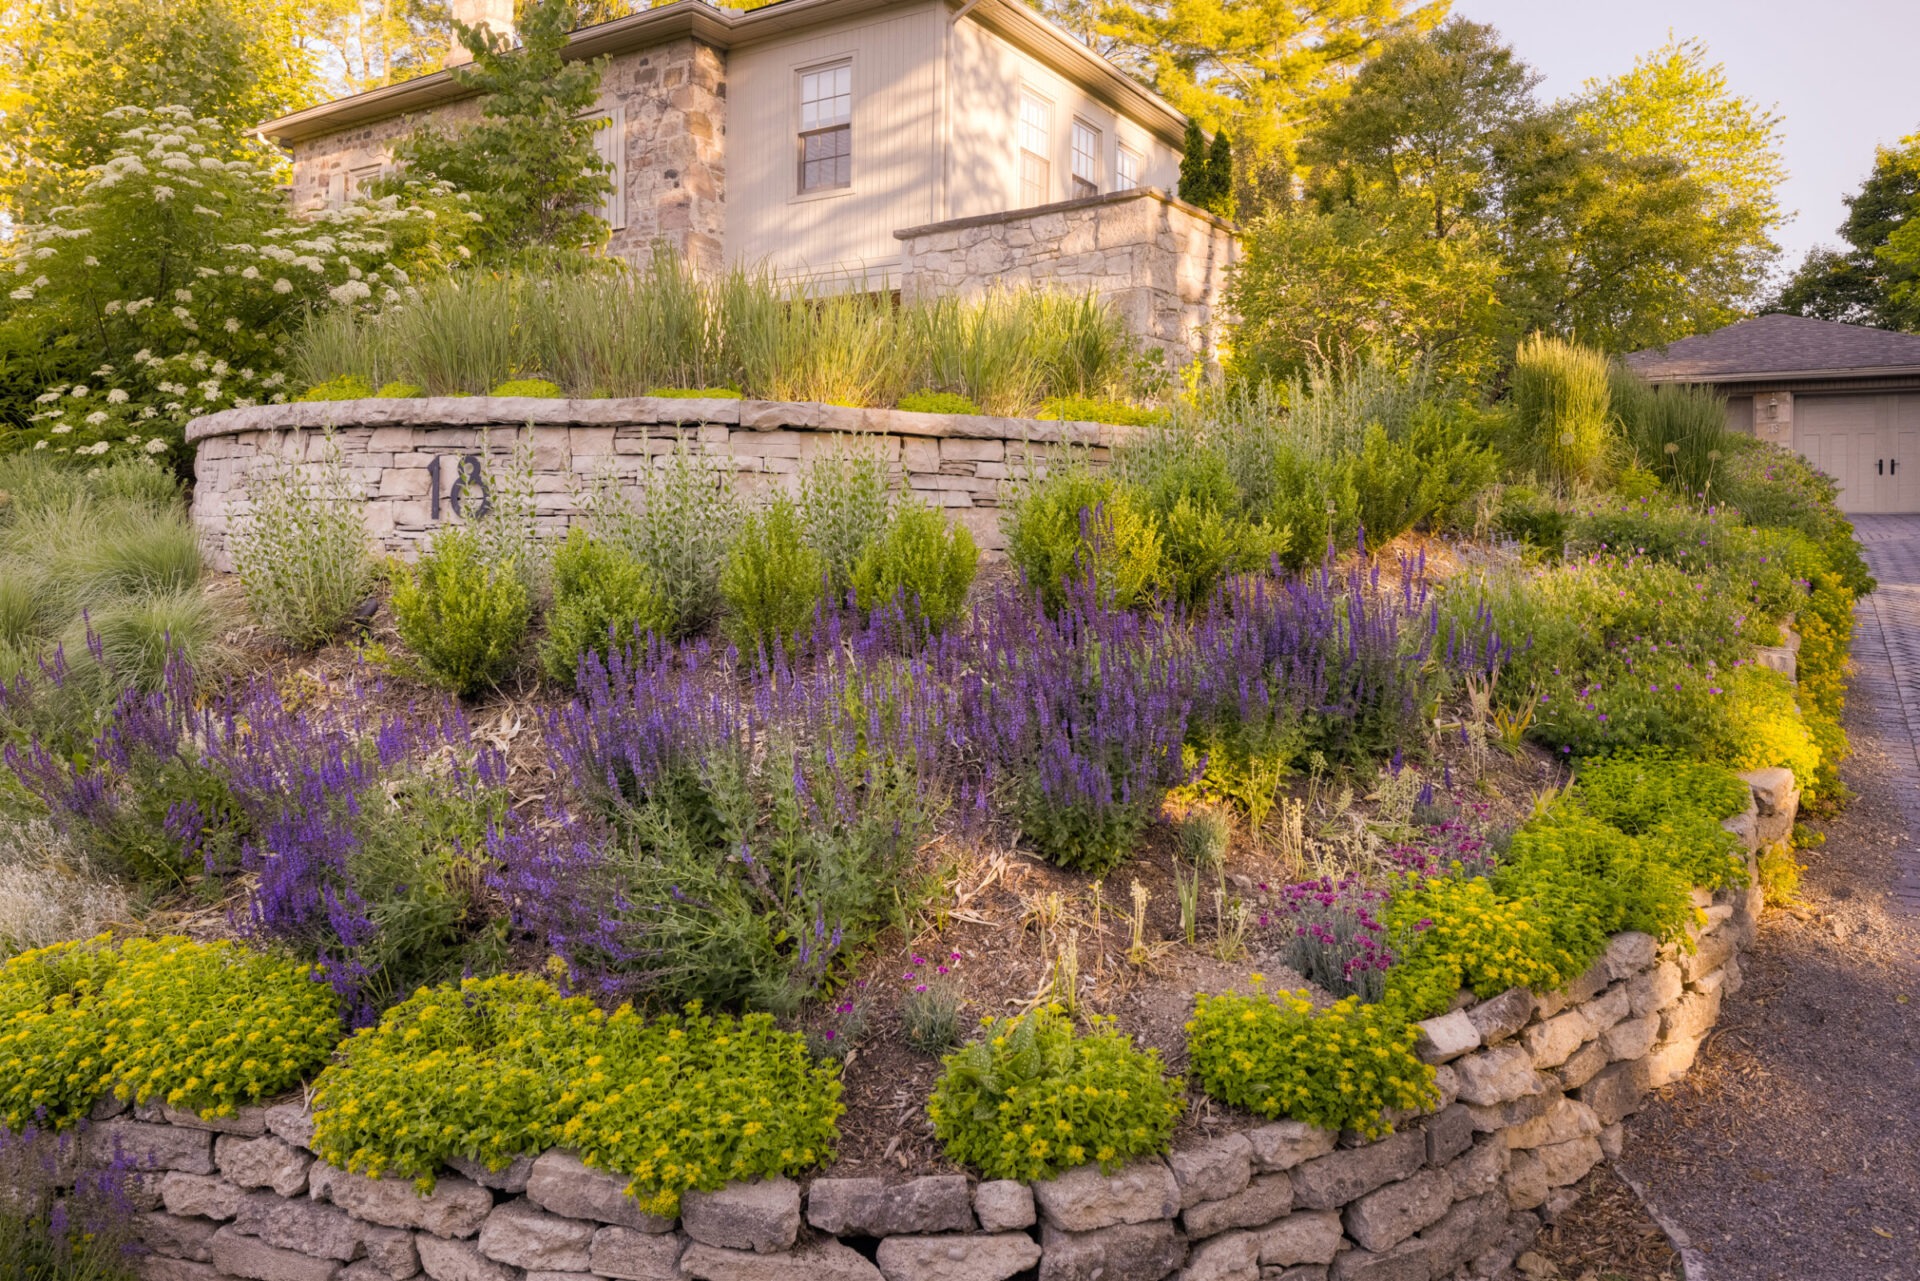 A tiered garden with stone retaining walls featuring purple and yellow flowers in front of a house with a stone facade during sunset.